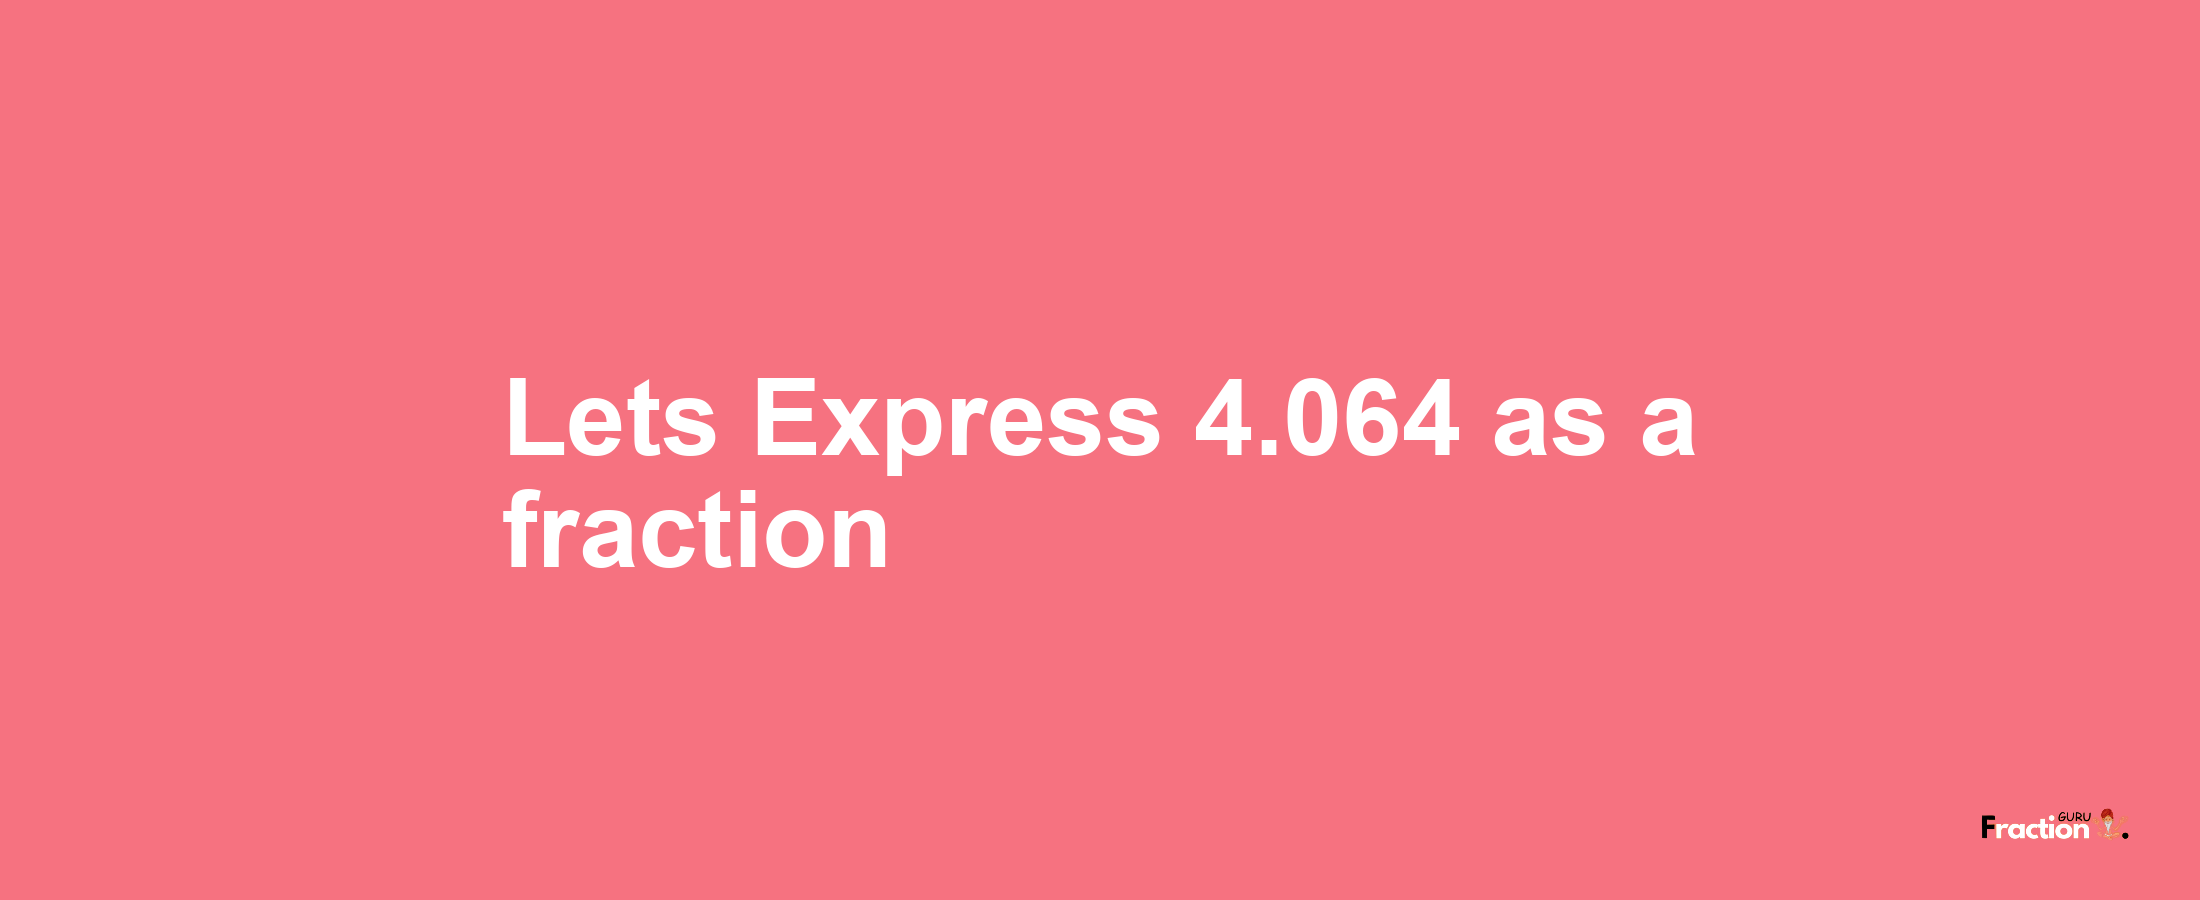 Lets Express 4.064 as afraction